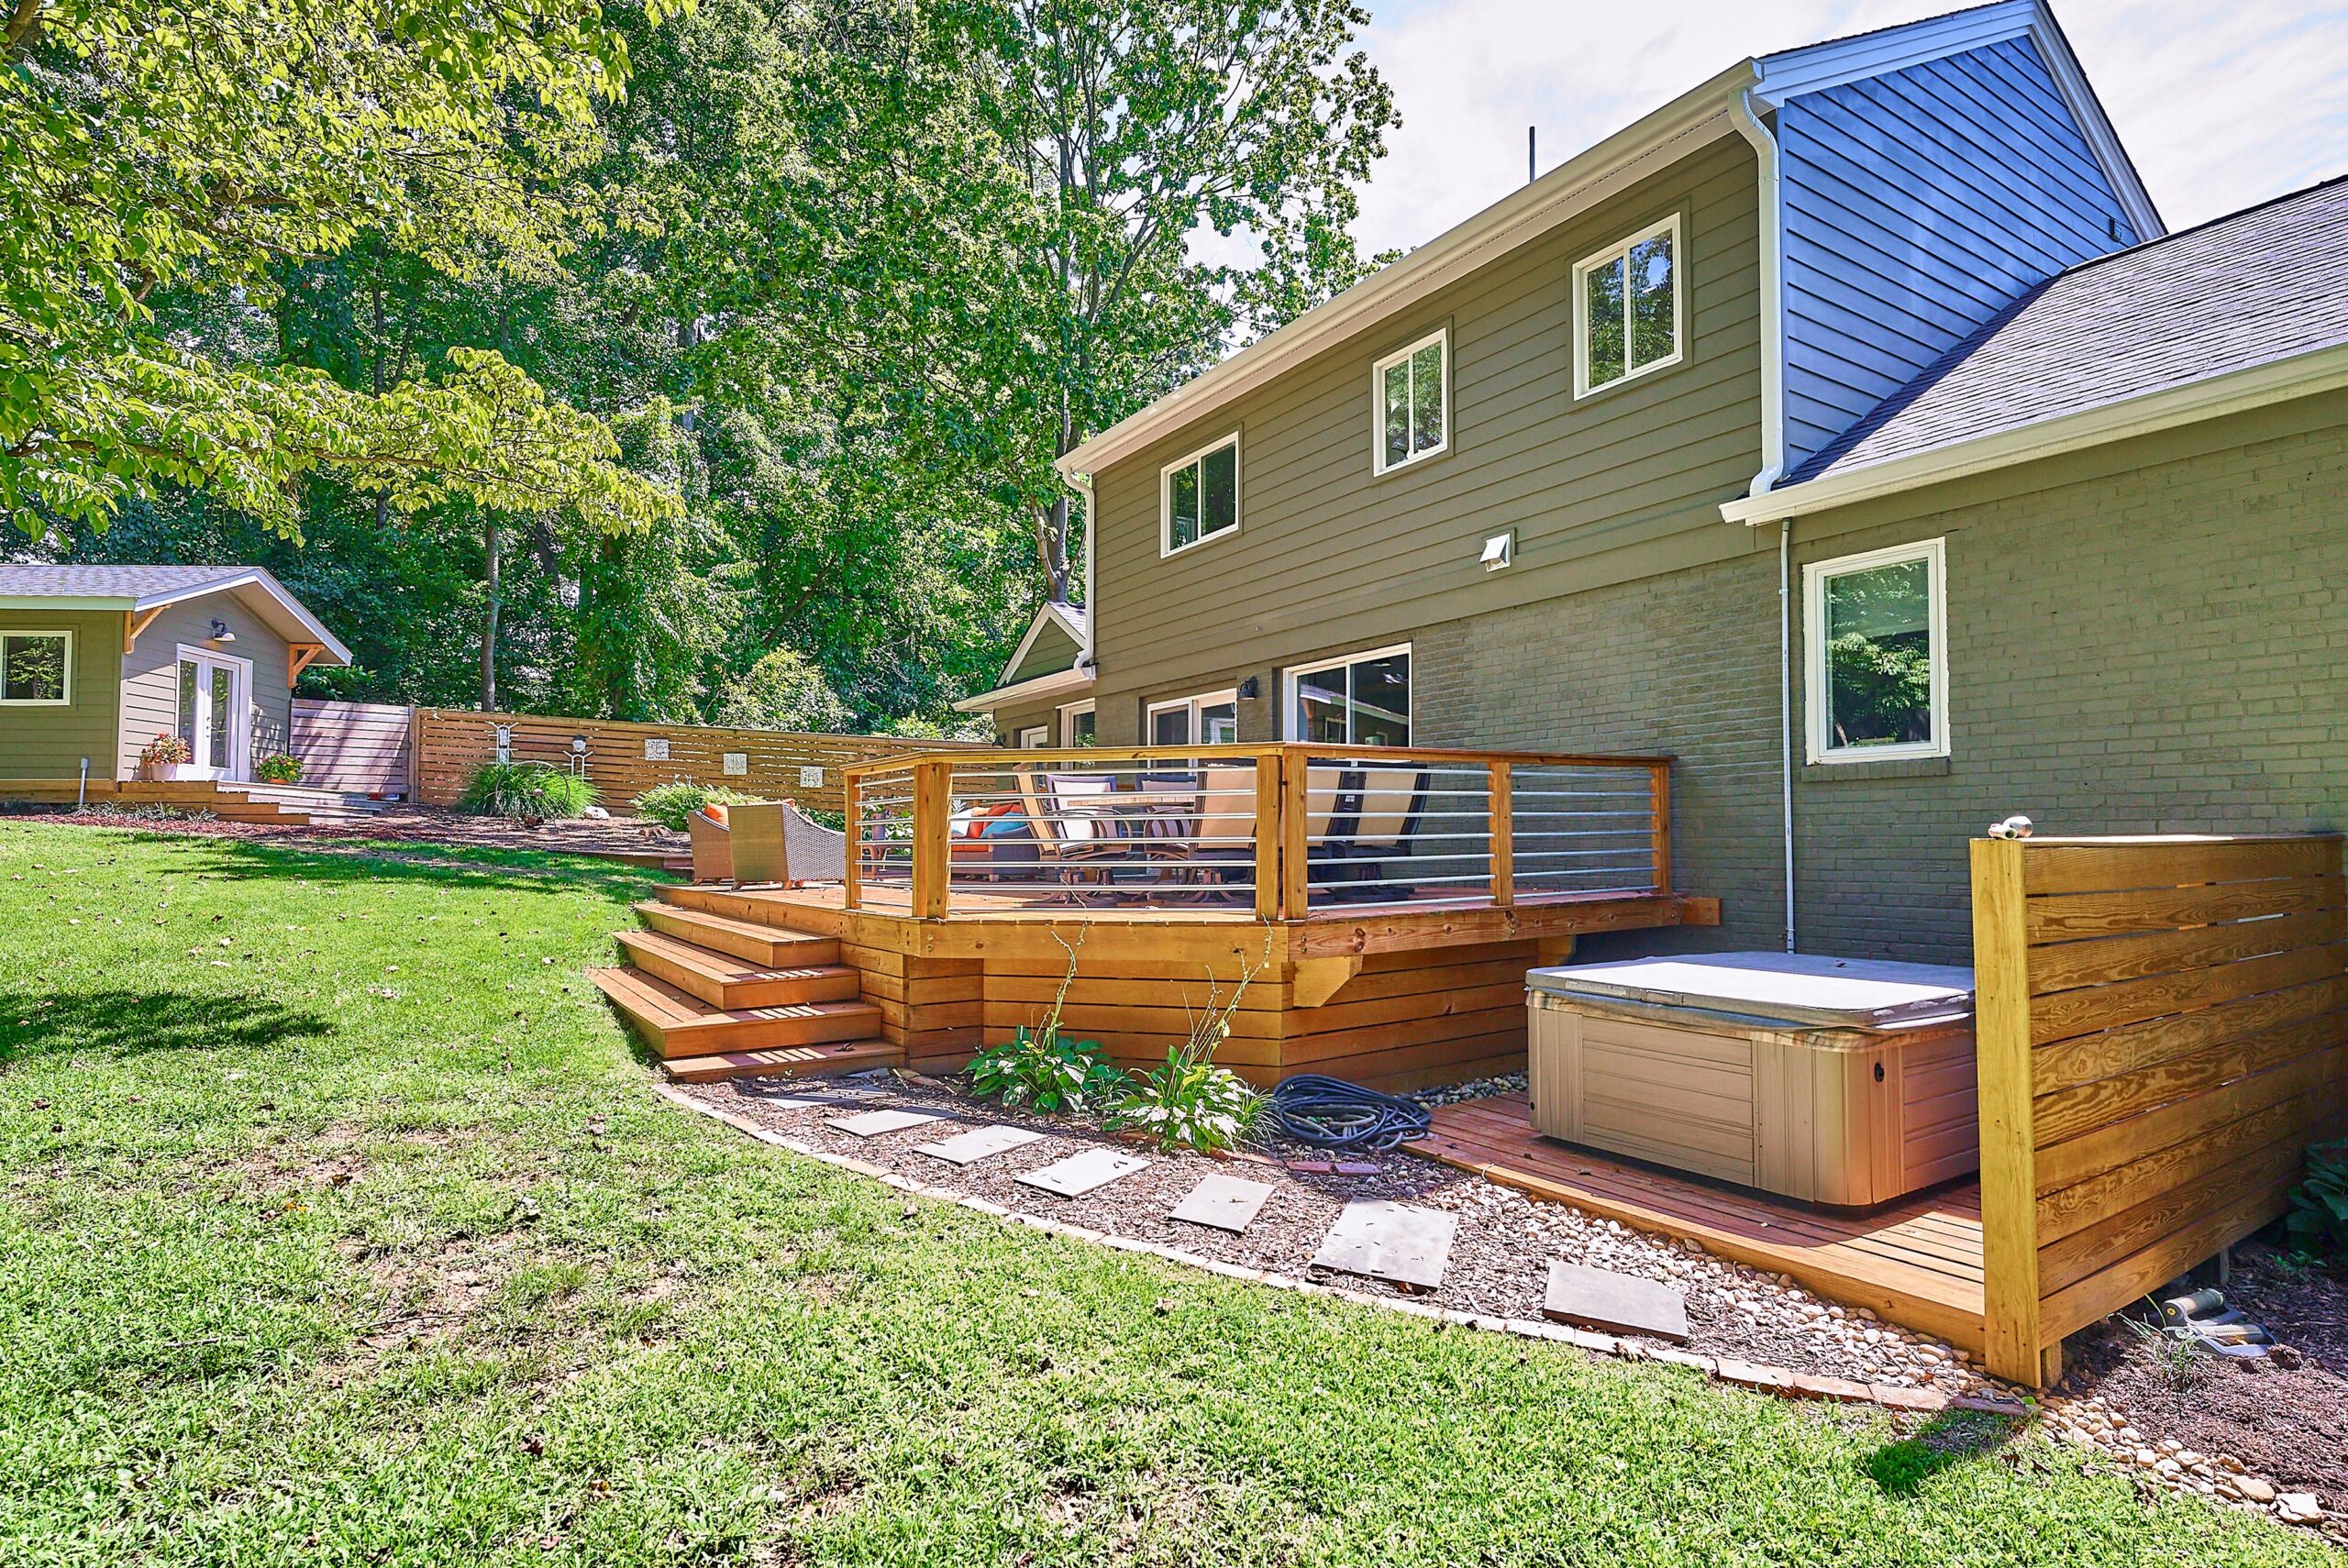 Professional photo of rear exterior of custom home in Falls Church, Virginia. Shows hot tub and flagstone path to the large deck with she-shed in the background.